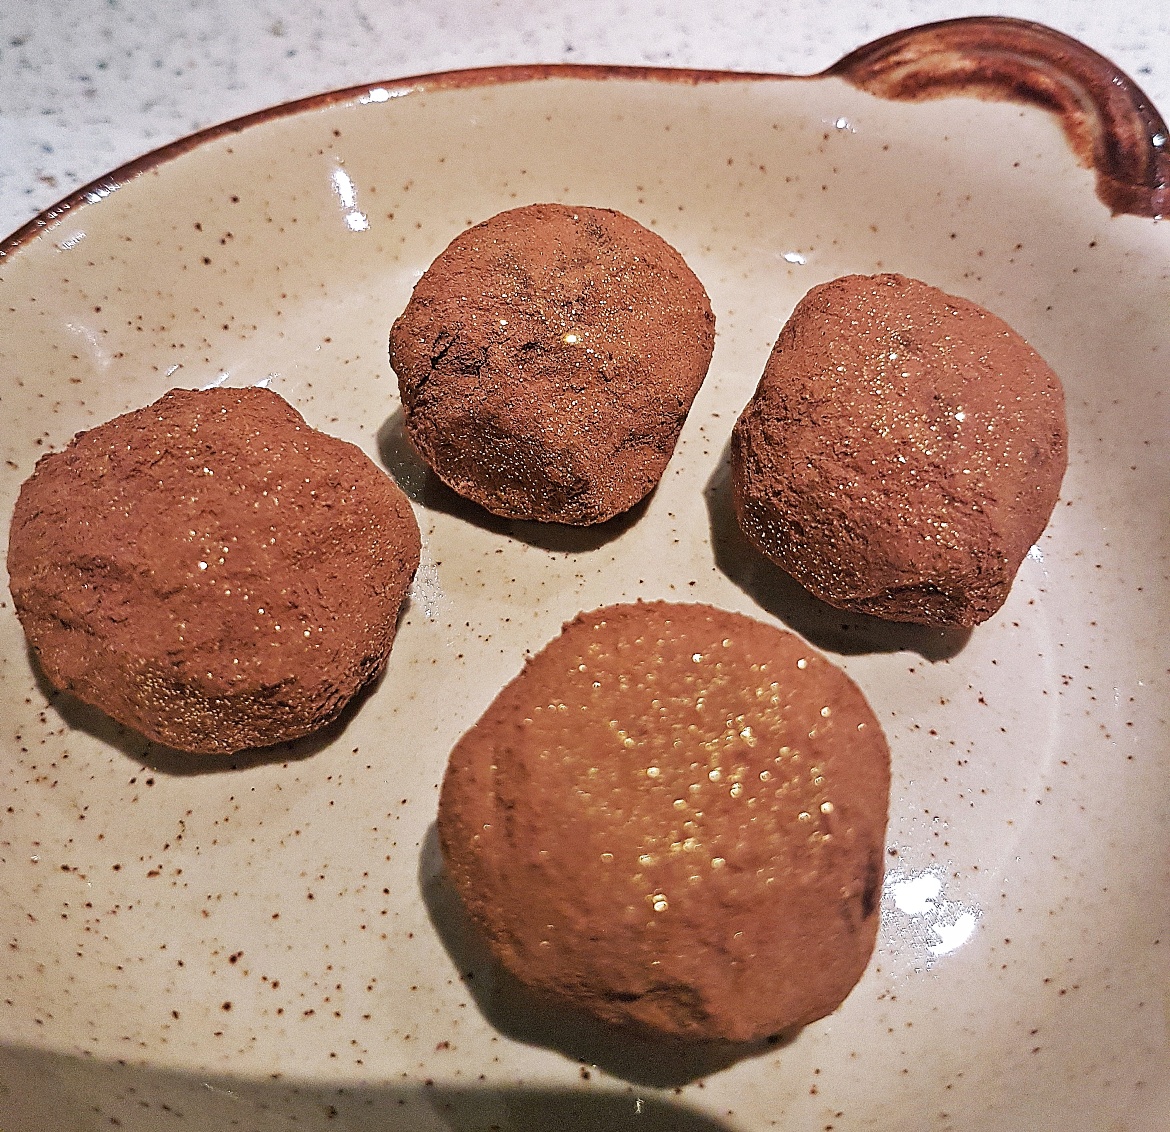 The finished truffles - Recipe for Gold Filter Truffles inspired by Deus Ex by BeckyBecky Blogs